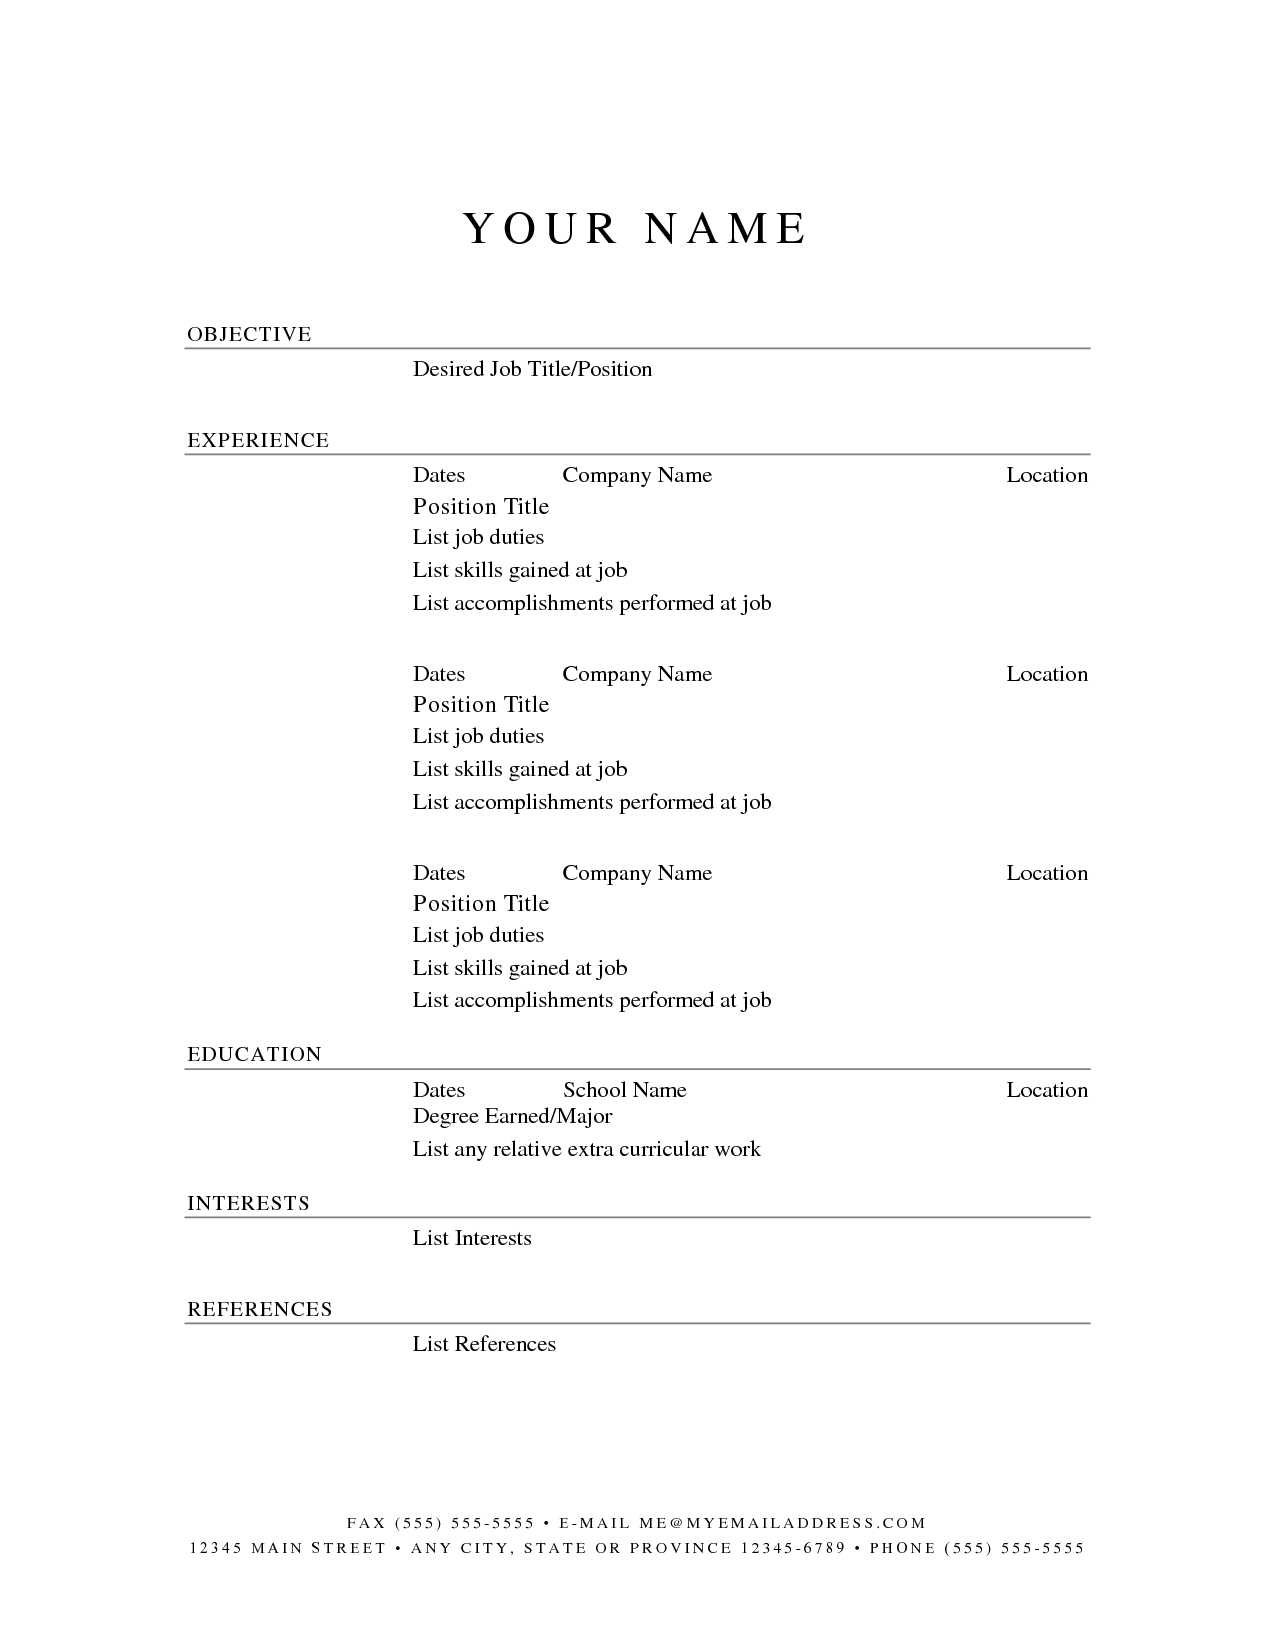 Free Printable Resume Templates Microsoft Word | Room Surf Throughout Free Blank Resume Templates For Microsoft Word